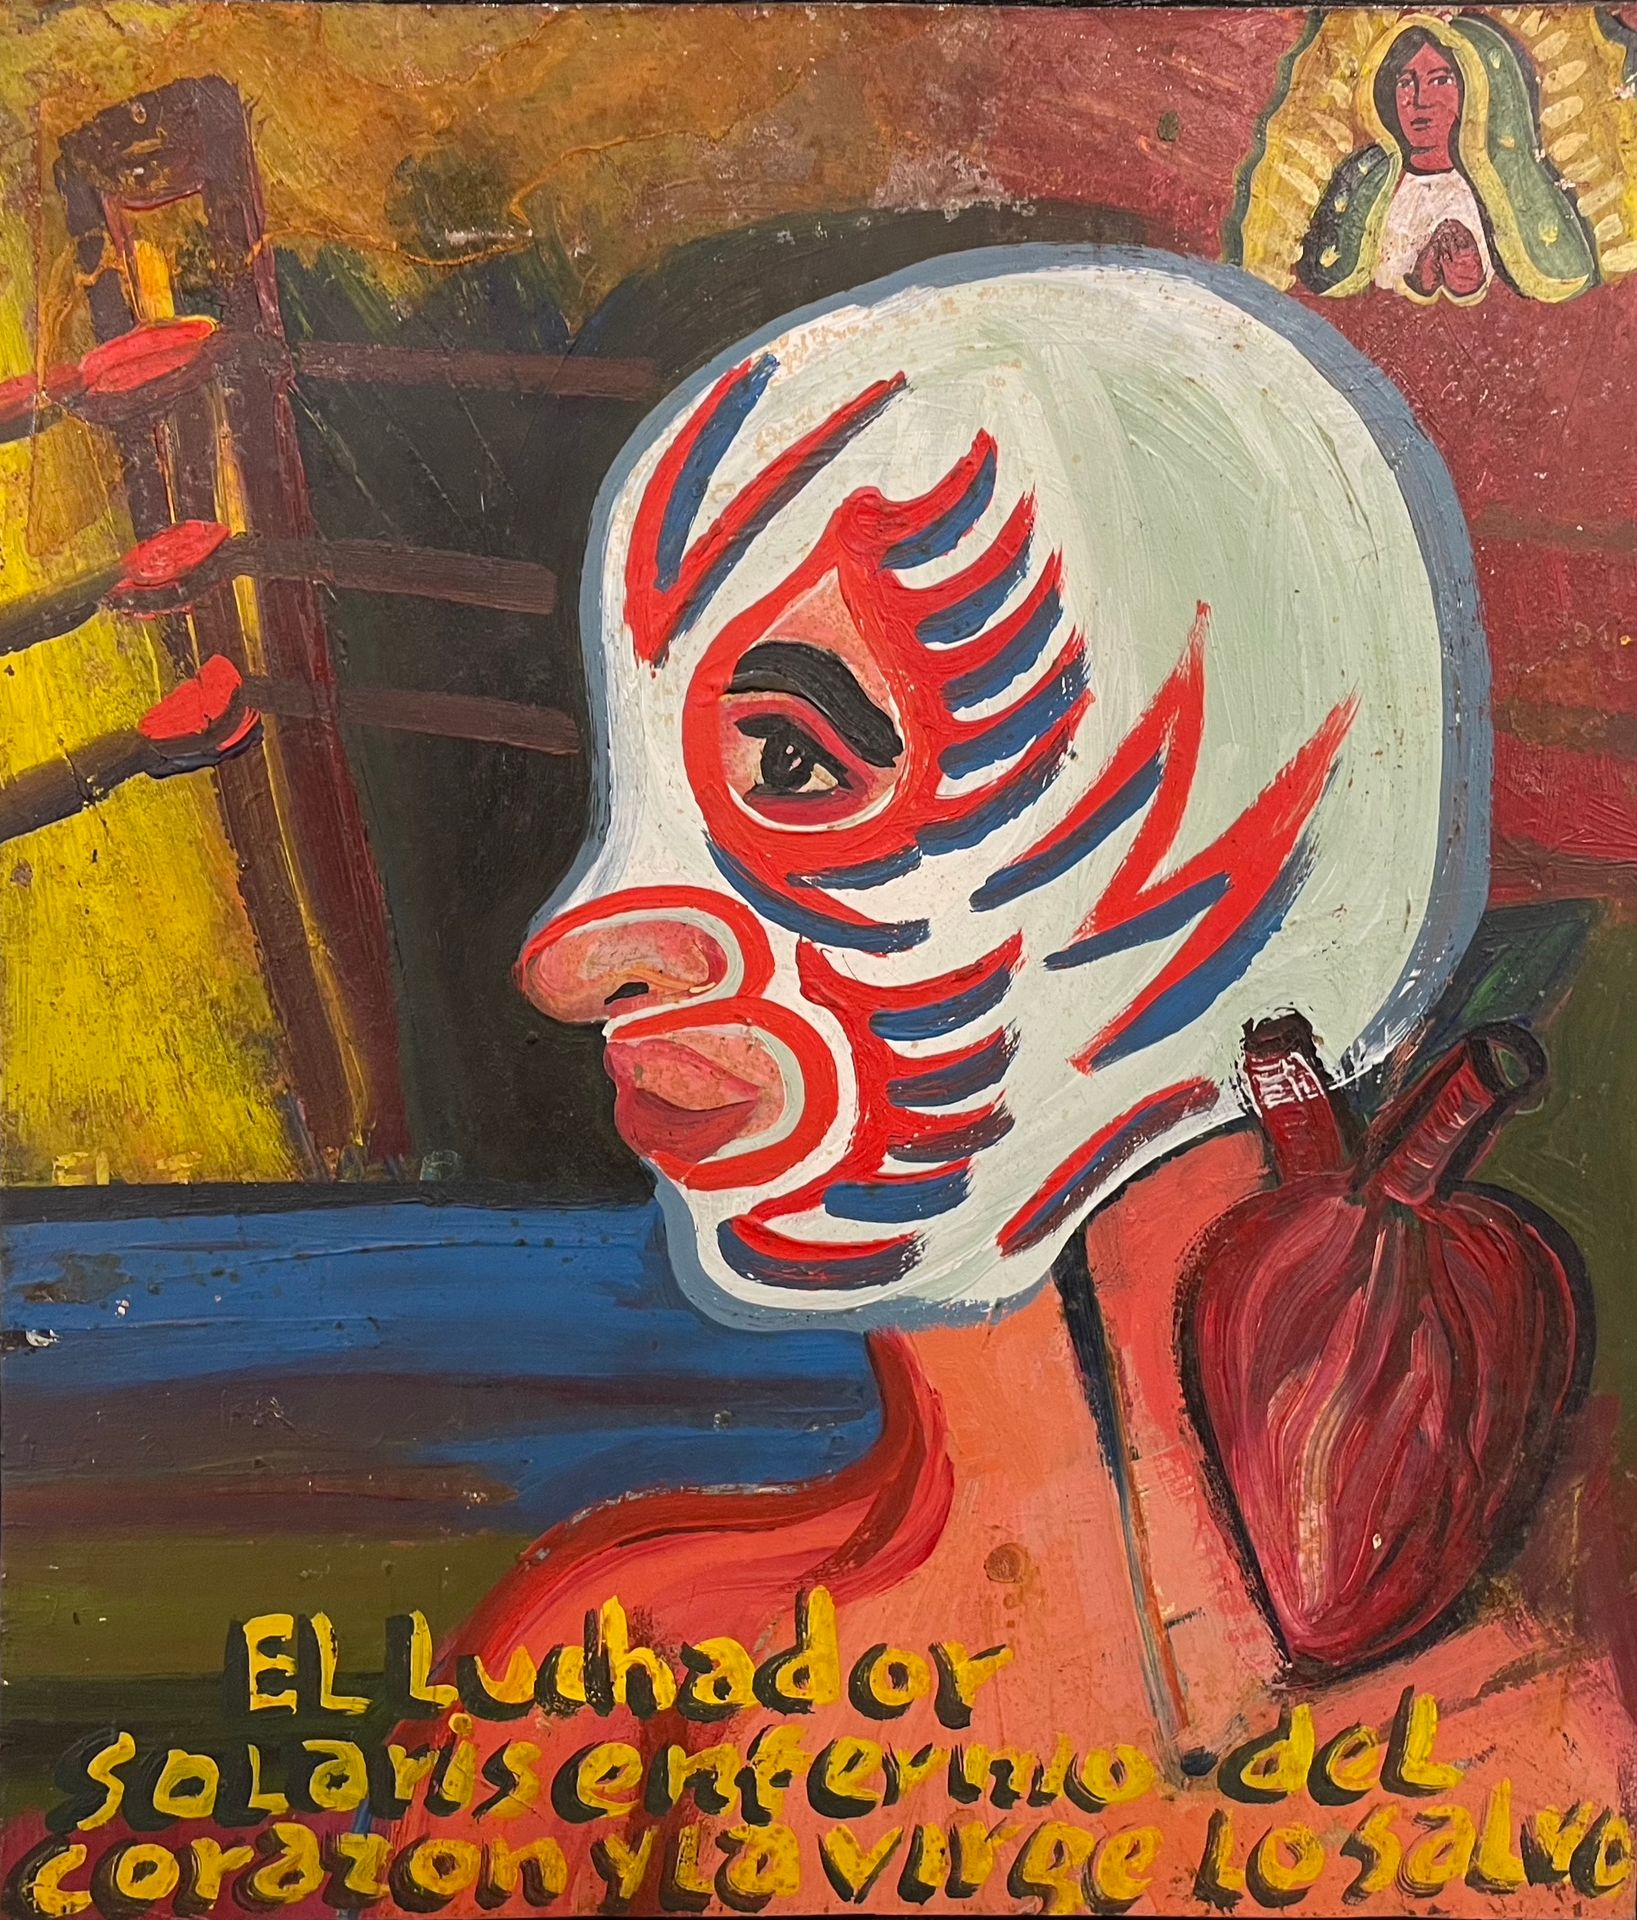 MECALCO (David). "El Luchador Solaris Enfernio". Oil on tin, titled and dated. D&hellip;